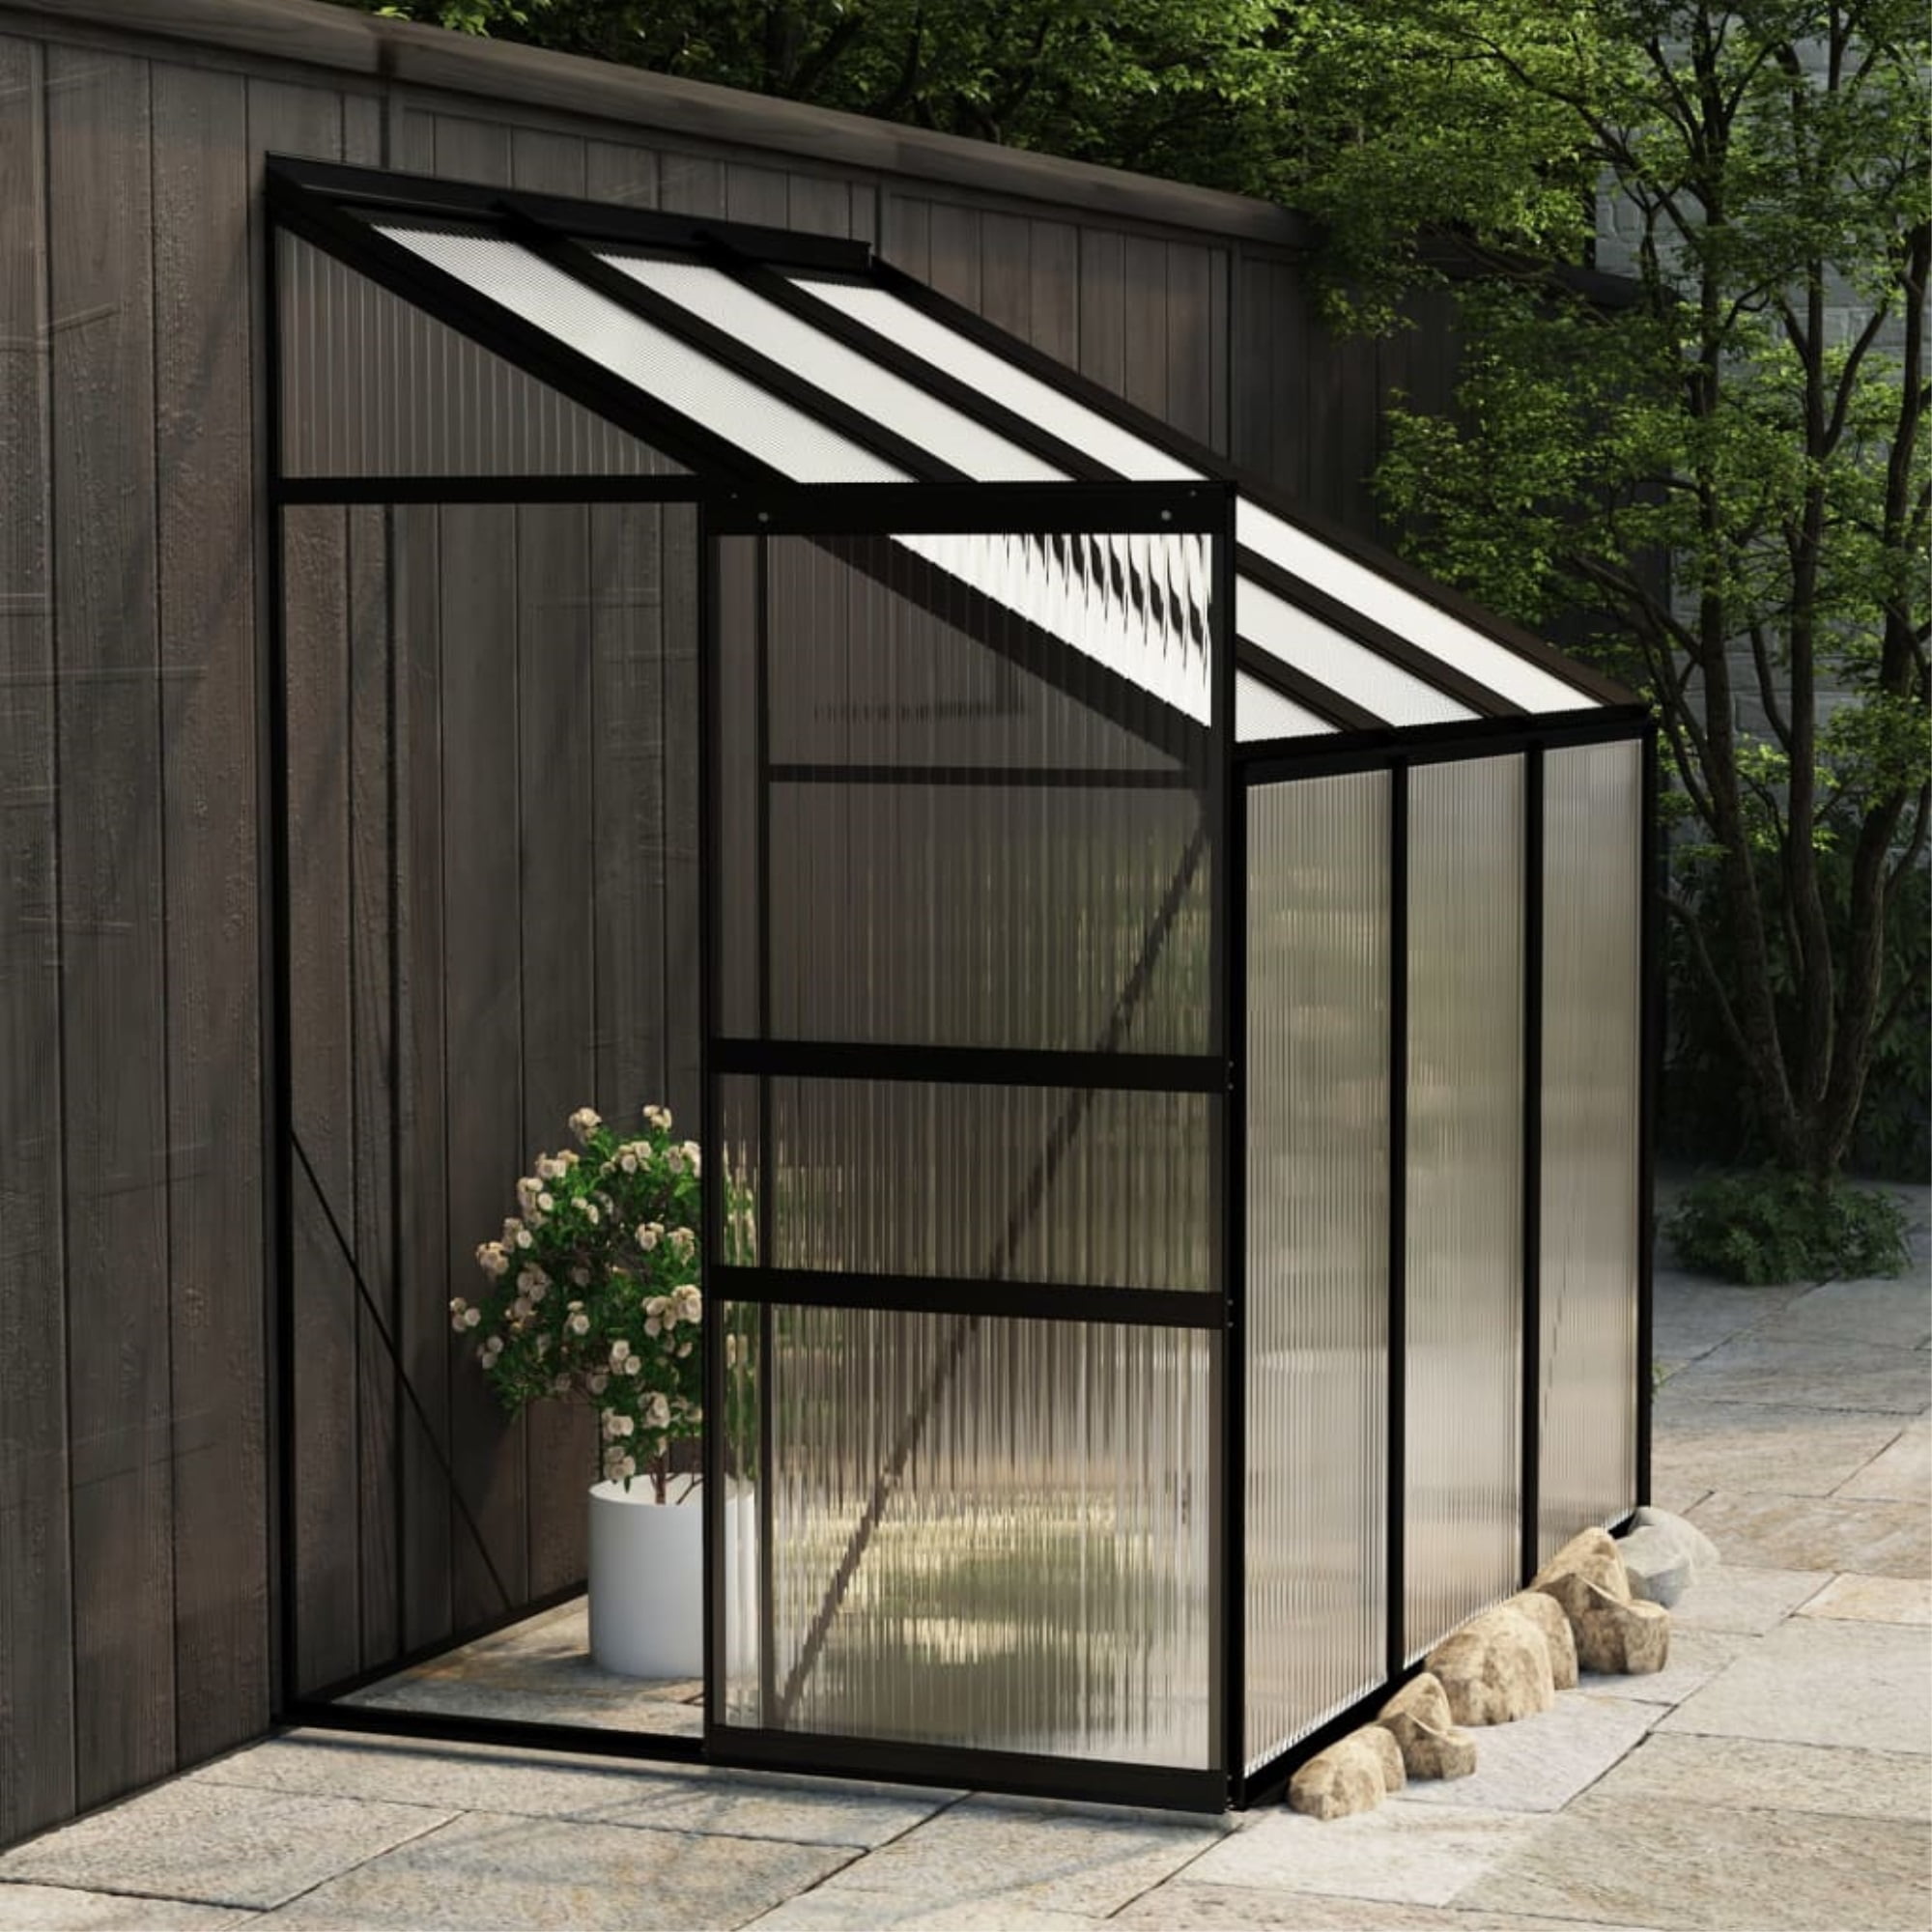 6' x 6' AMERLIFE Hobby Greenhouse Polycarbonate Greenhouse with Sliding Door Adjustable Roof Vent 8 Raised Base and Anchor Aluminum Frame Green House for Plants Flowers Herbs Backyard/Outdoor Use 